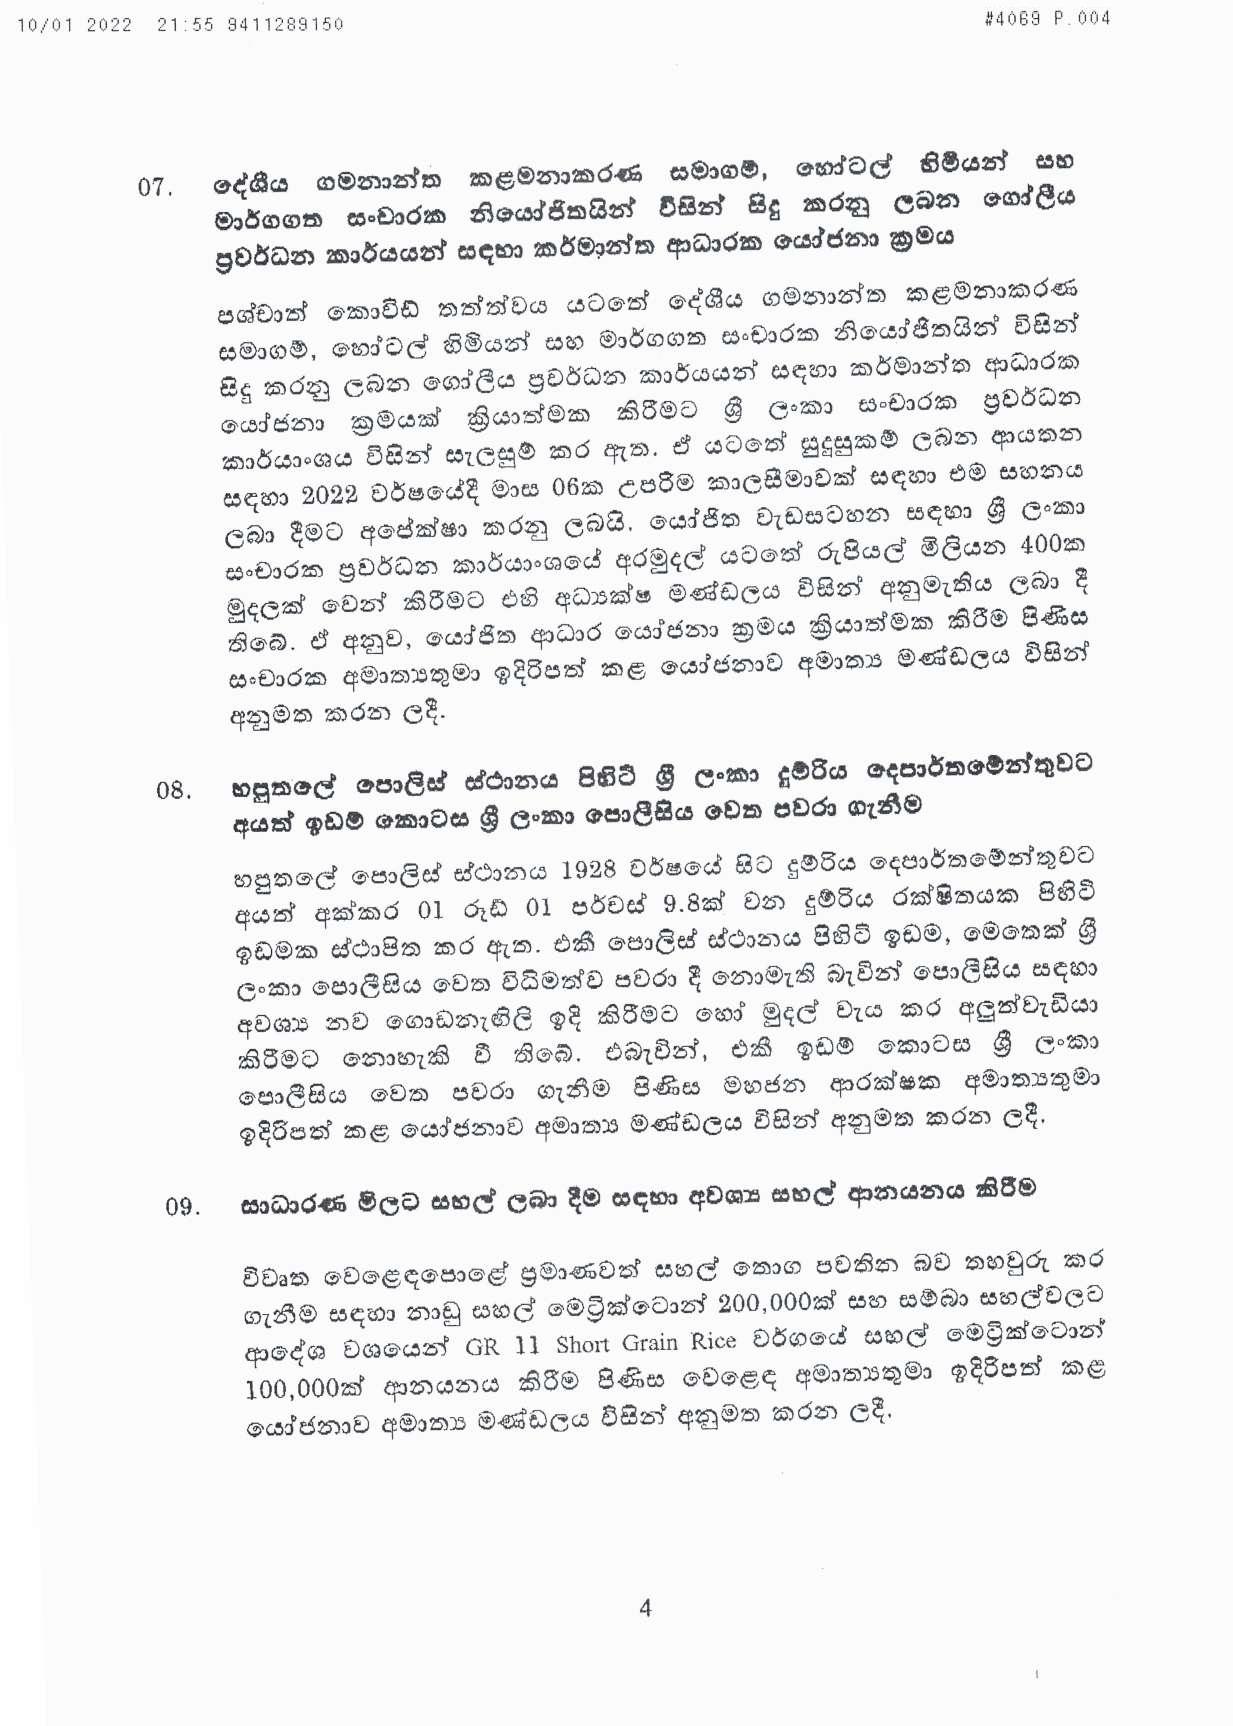 Cabinet Decision on 10.01.2022 page 001